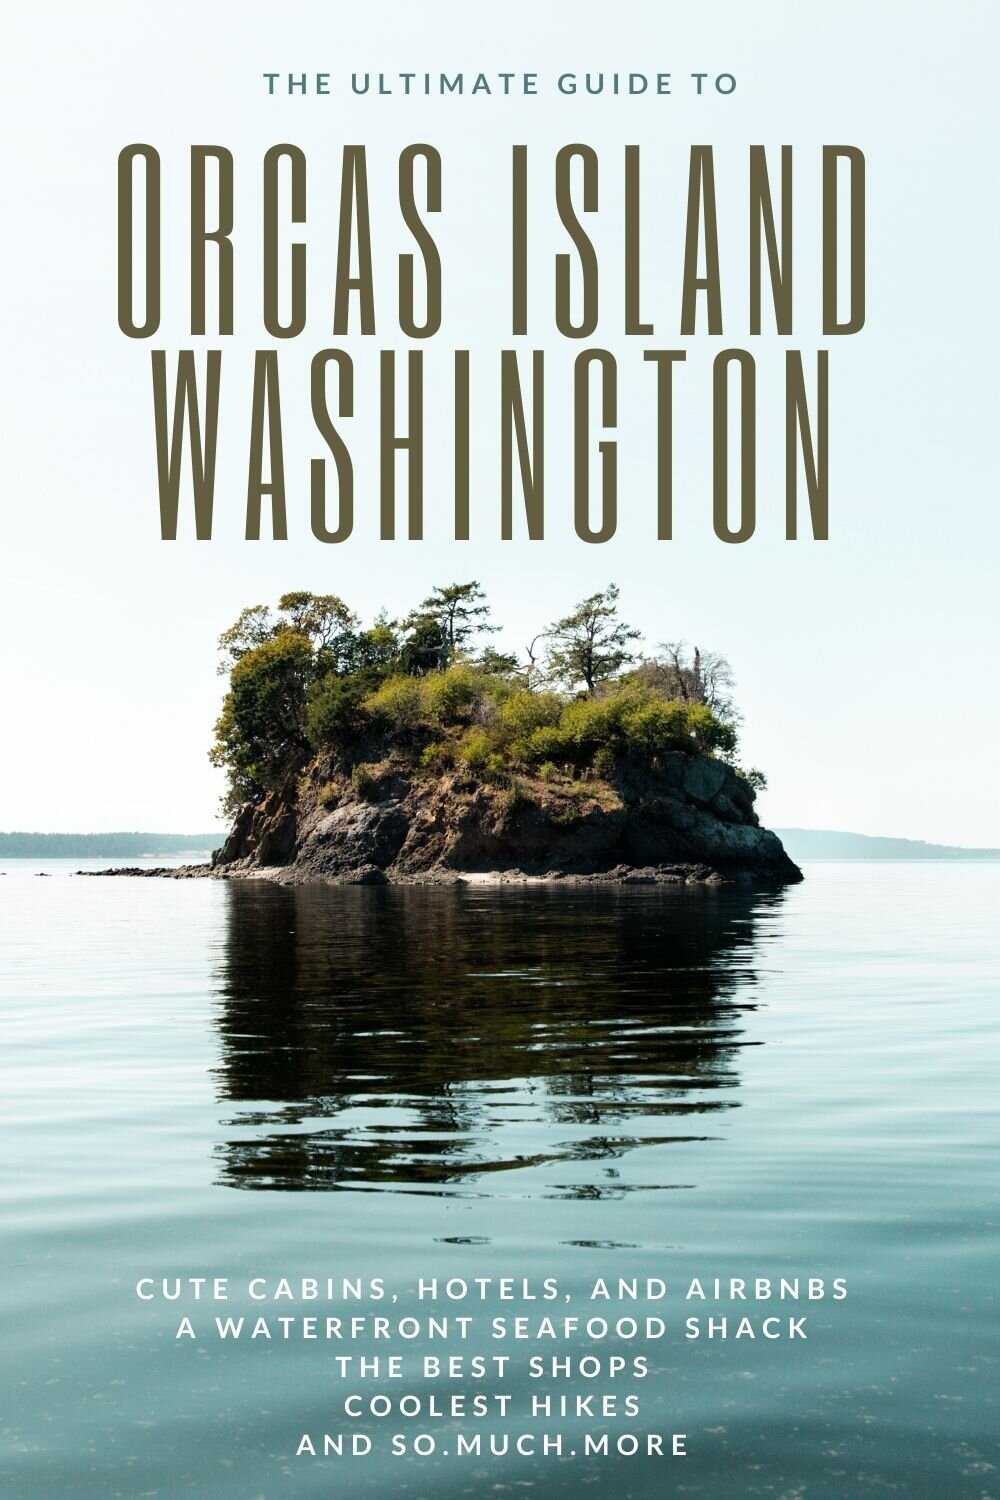 The Ultimate Guide to Orcas Island Washington where to find the best restaurants shops hotels and more. (1).jpg